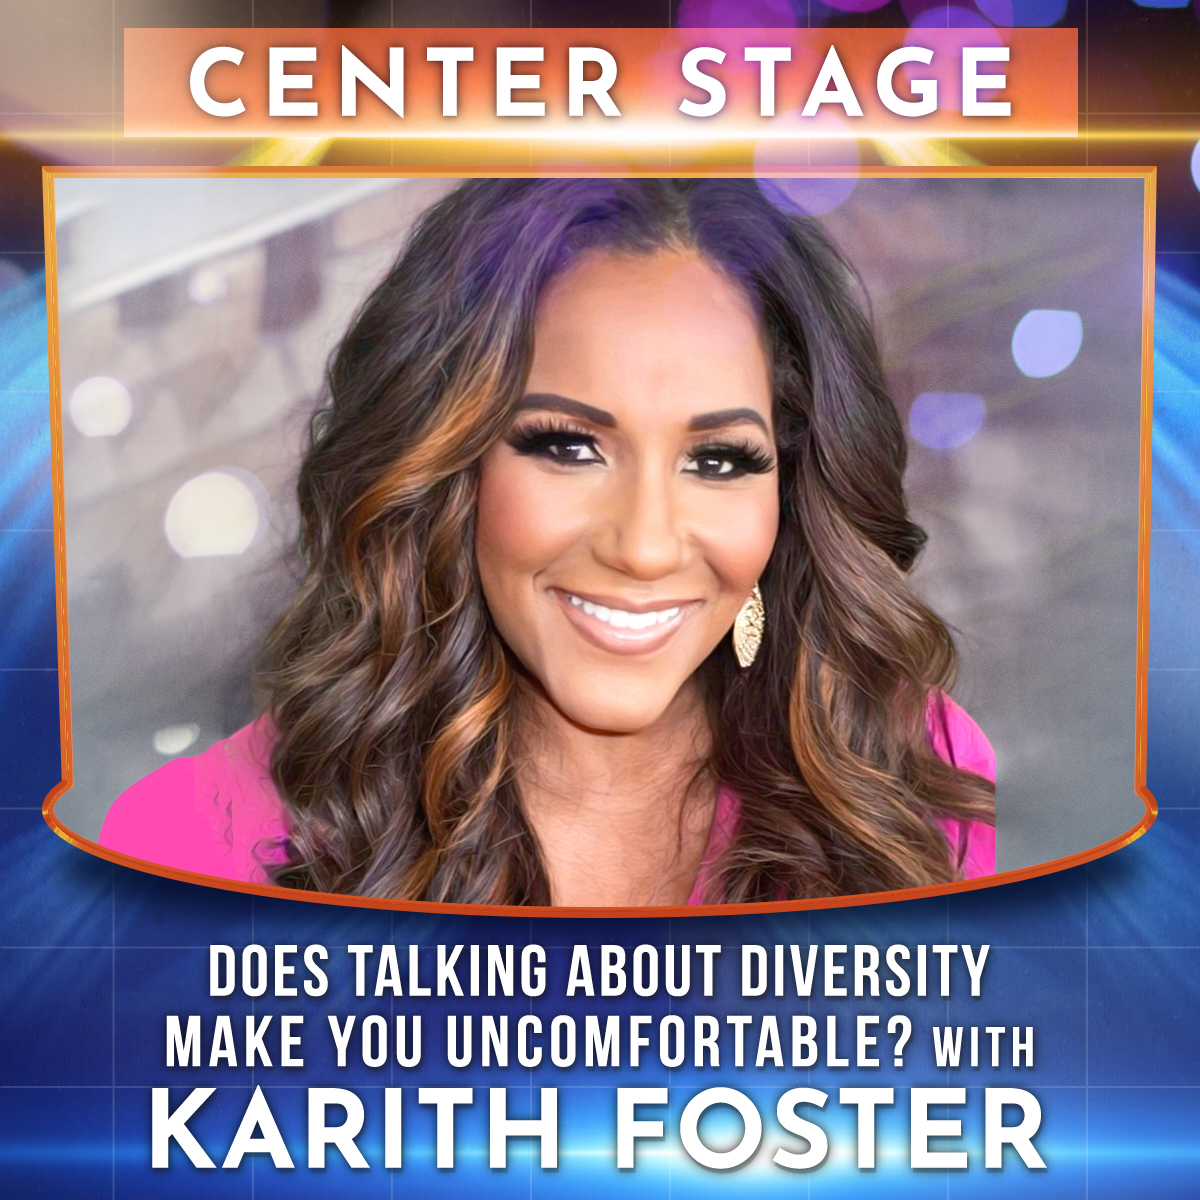 Does Talking About Diversity Make You Uncomfortable? 🤔 Center Stage with Karith Foster